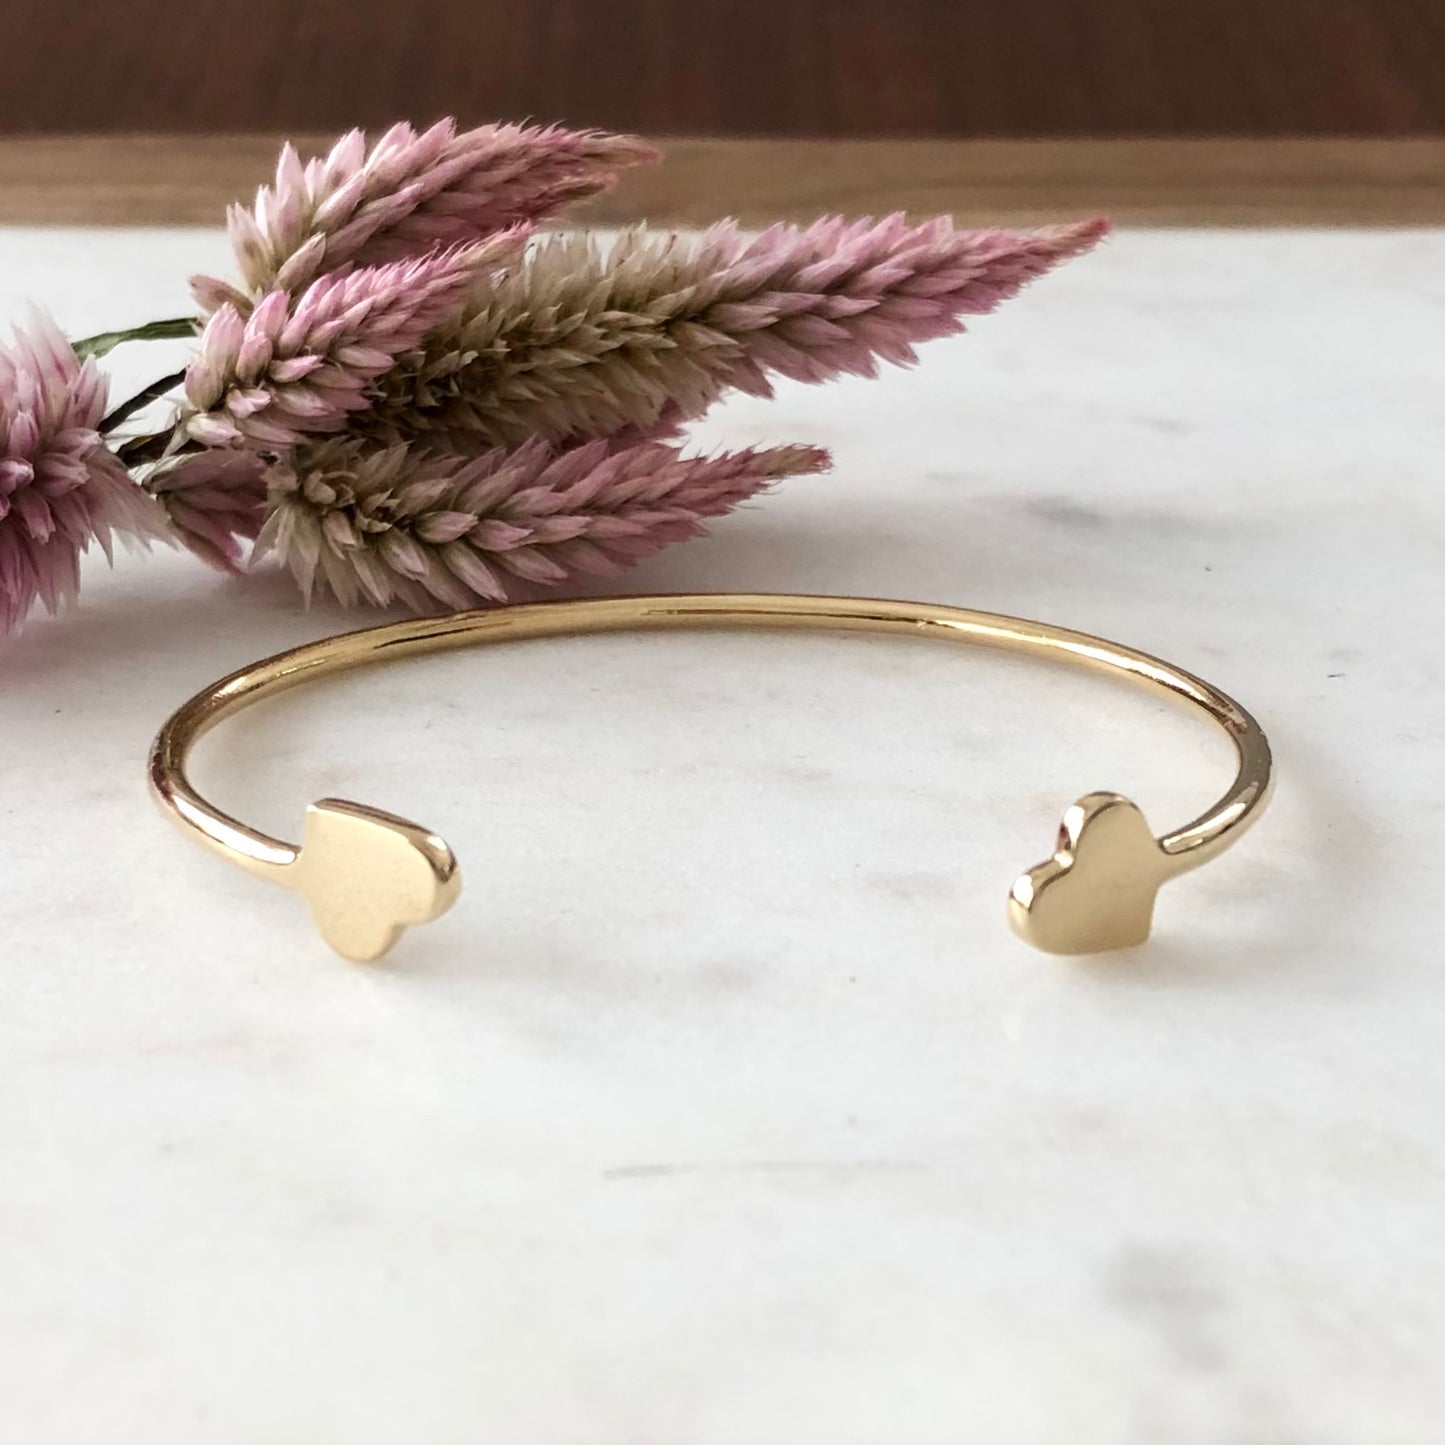 Gold cuff heart bracelet displayed on marble with a flower in the background.